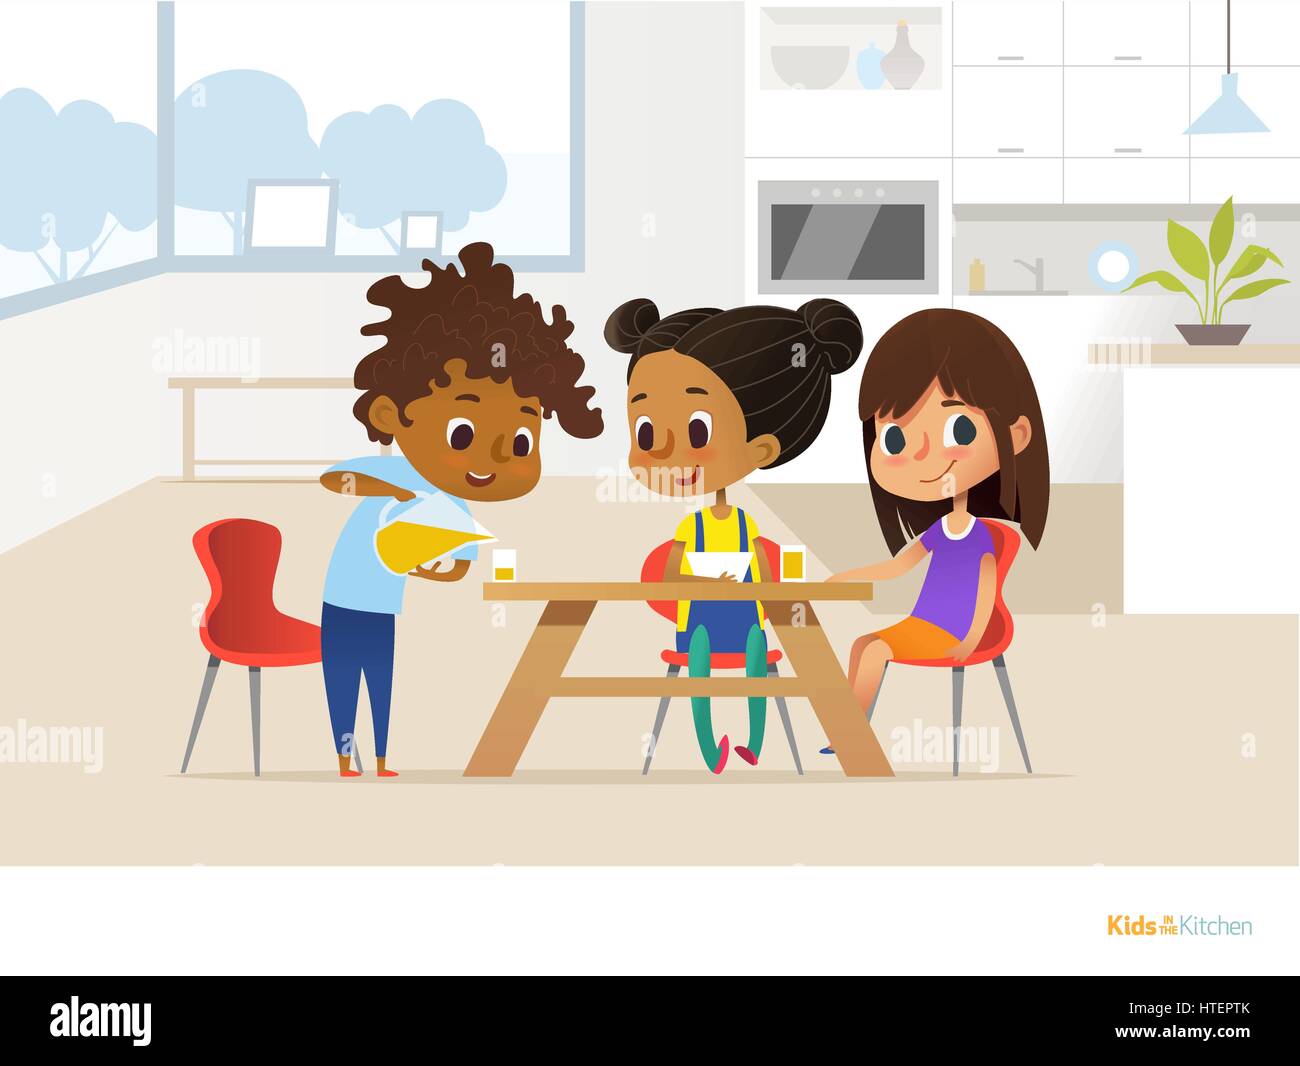 Multiracial children preparing lunch by themselves and eating. Two girls sitting at table and boy pouring orange juice into glass. Kids in dining room concept. Vector illustration for banner, website. Stock Vector